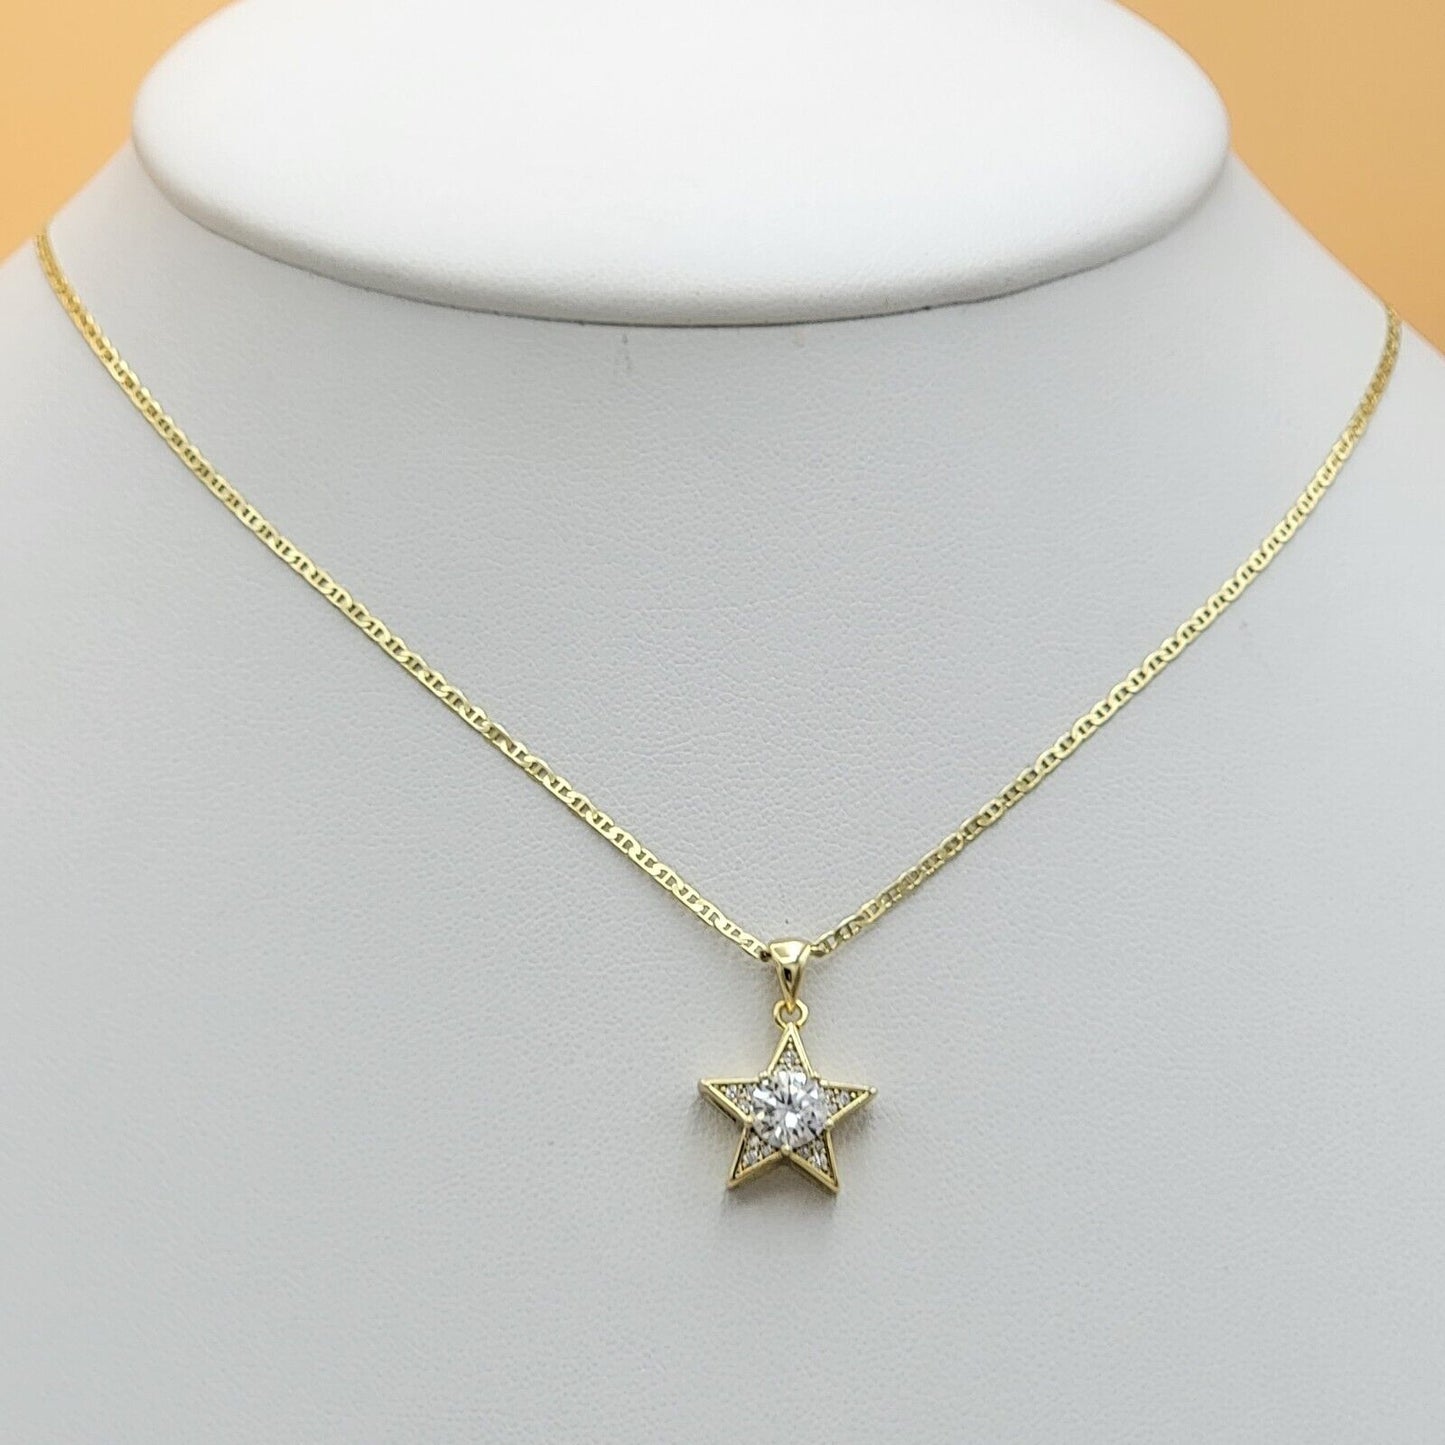 Necklaces - 14K Gold Plated. Shiny Star Pendant & Chain.